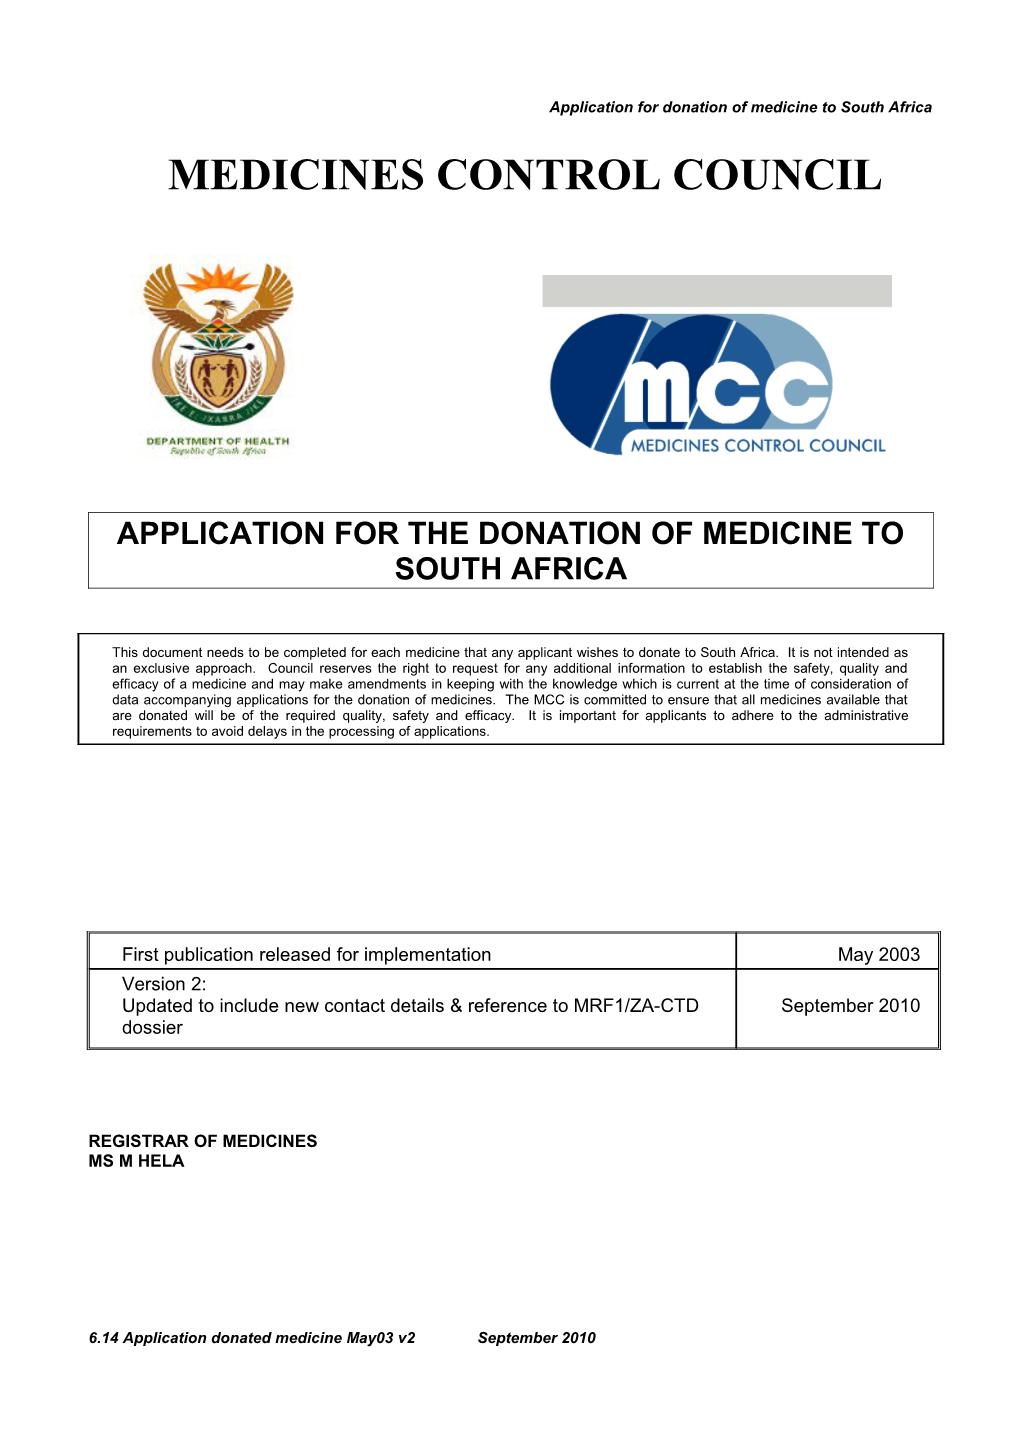 Questionnaire on Donated Medicines